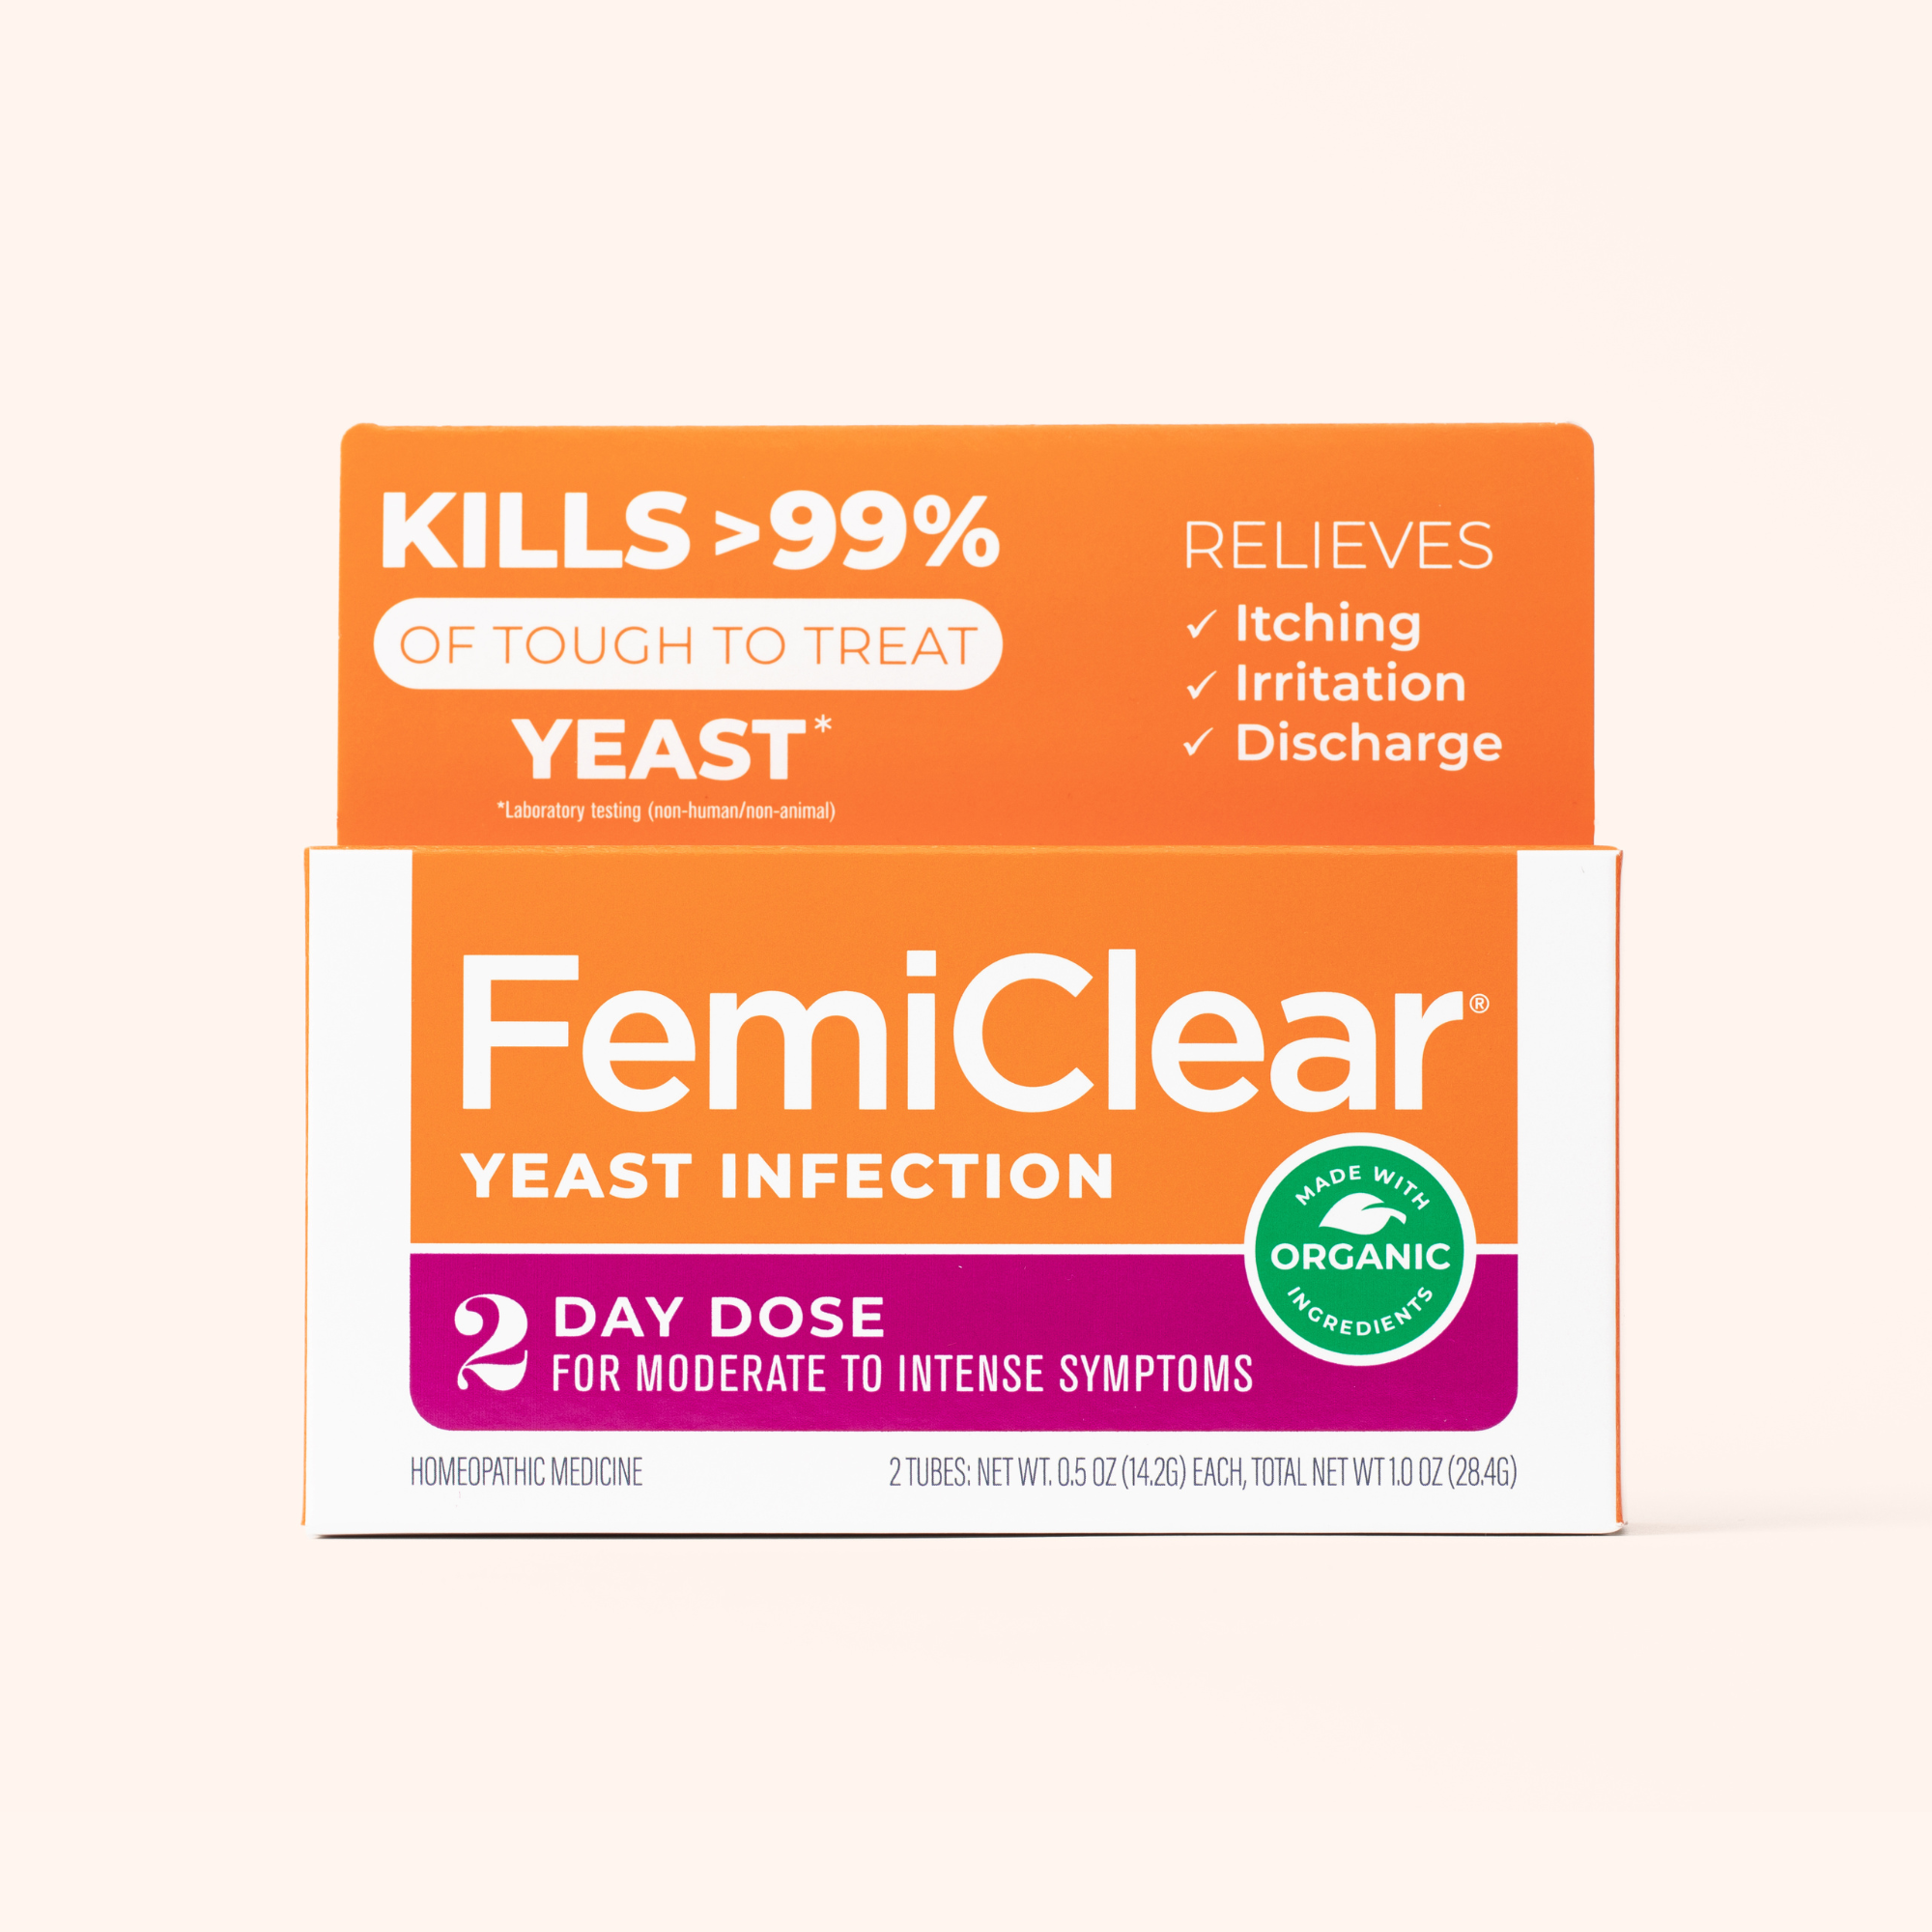 9 Effective Ways to Treat and Fend Off Yeast Infections for Good